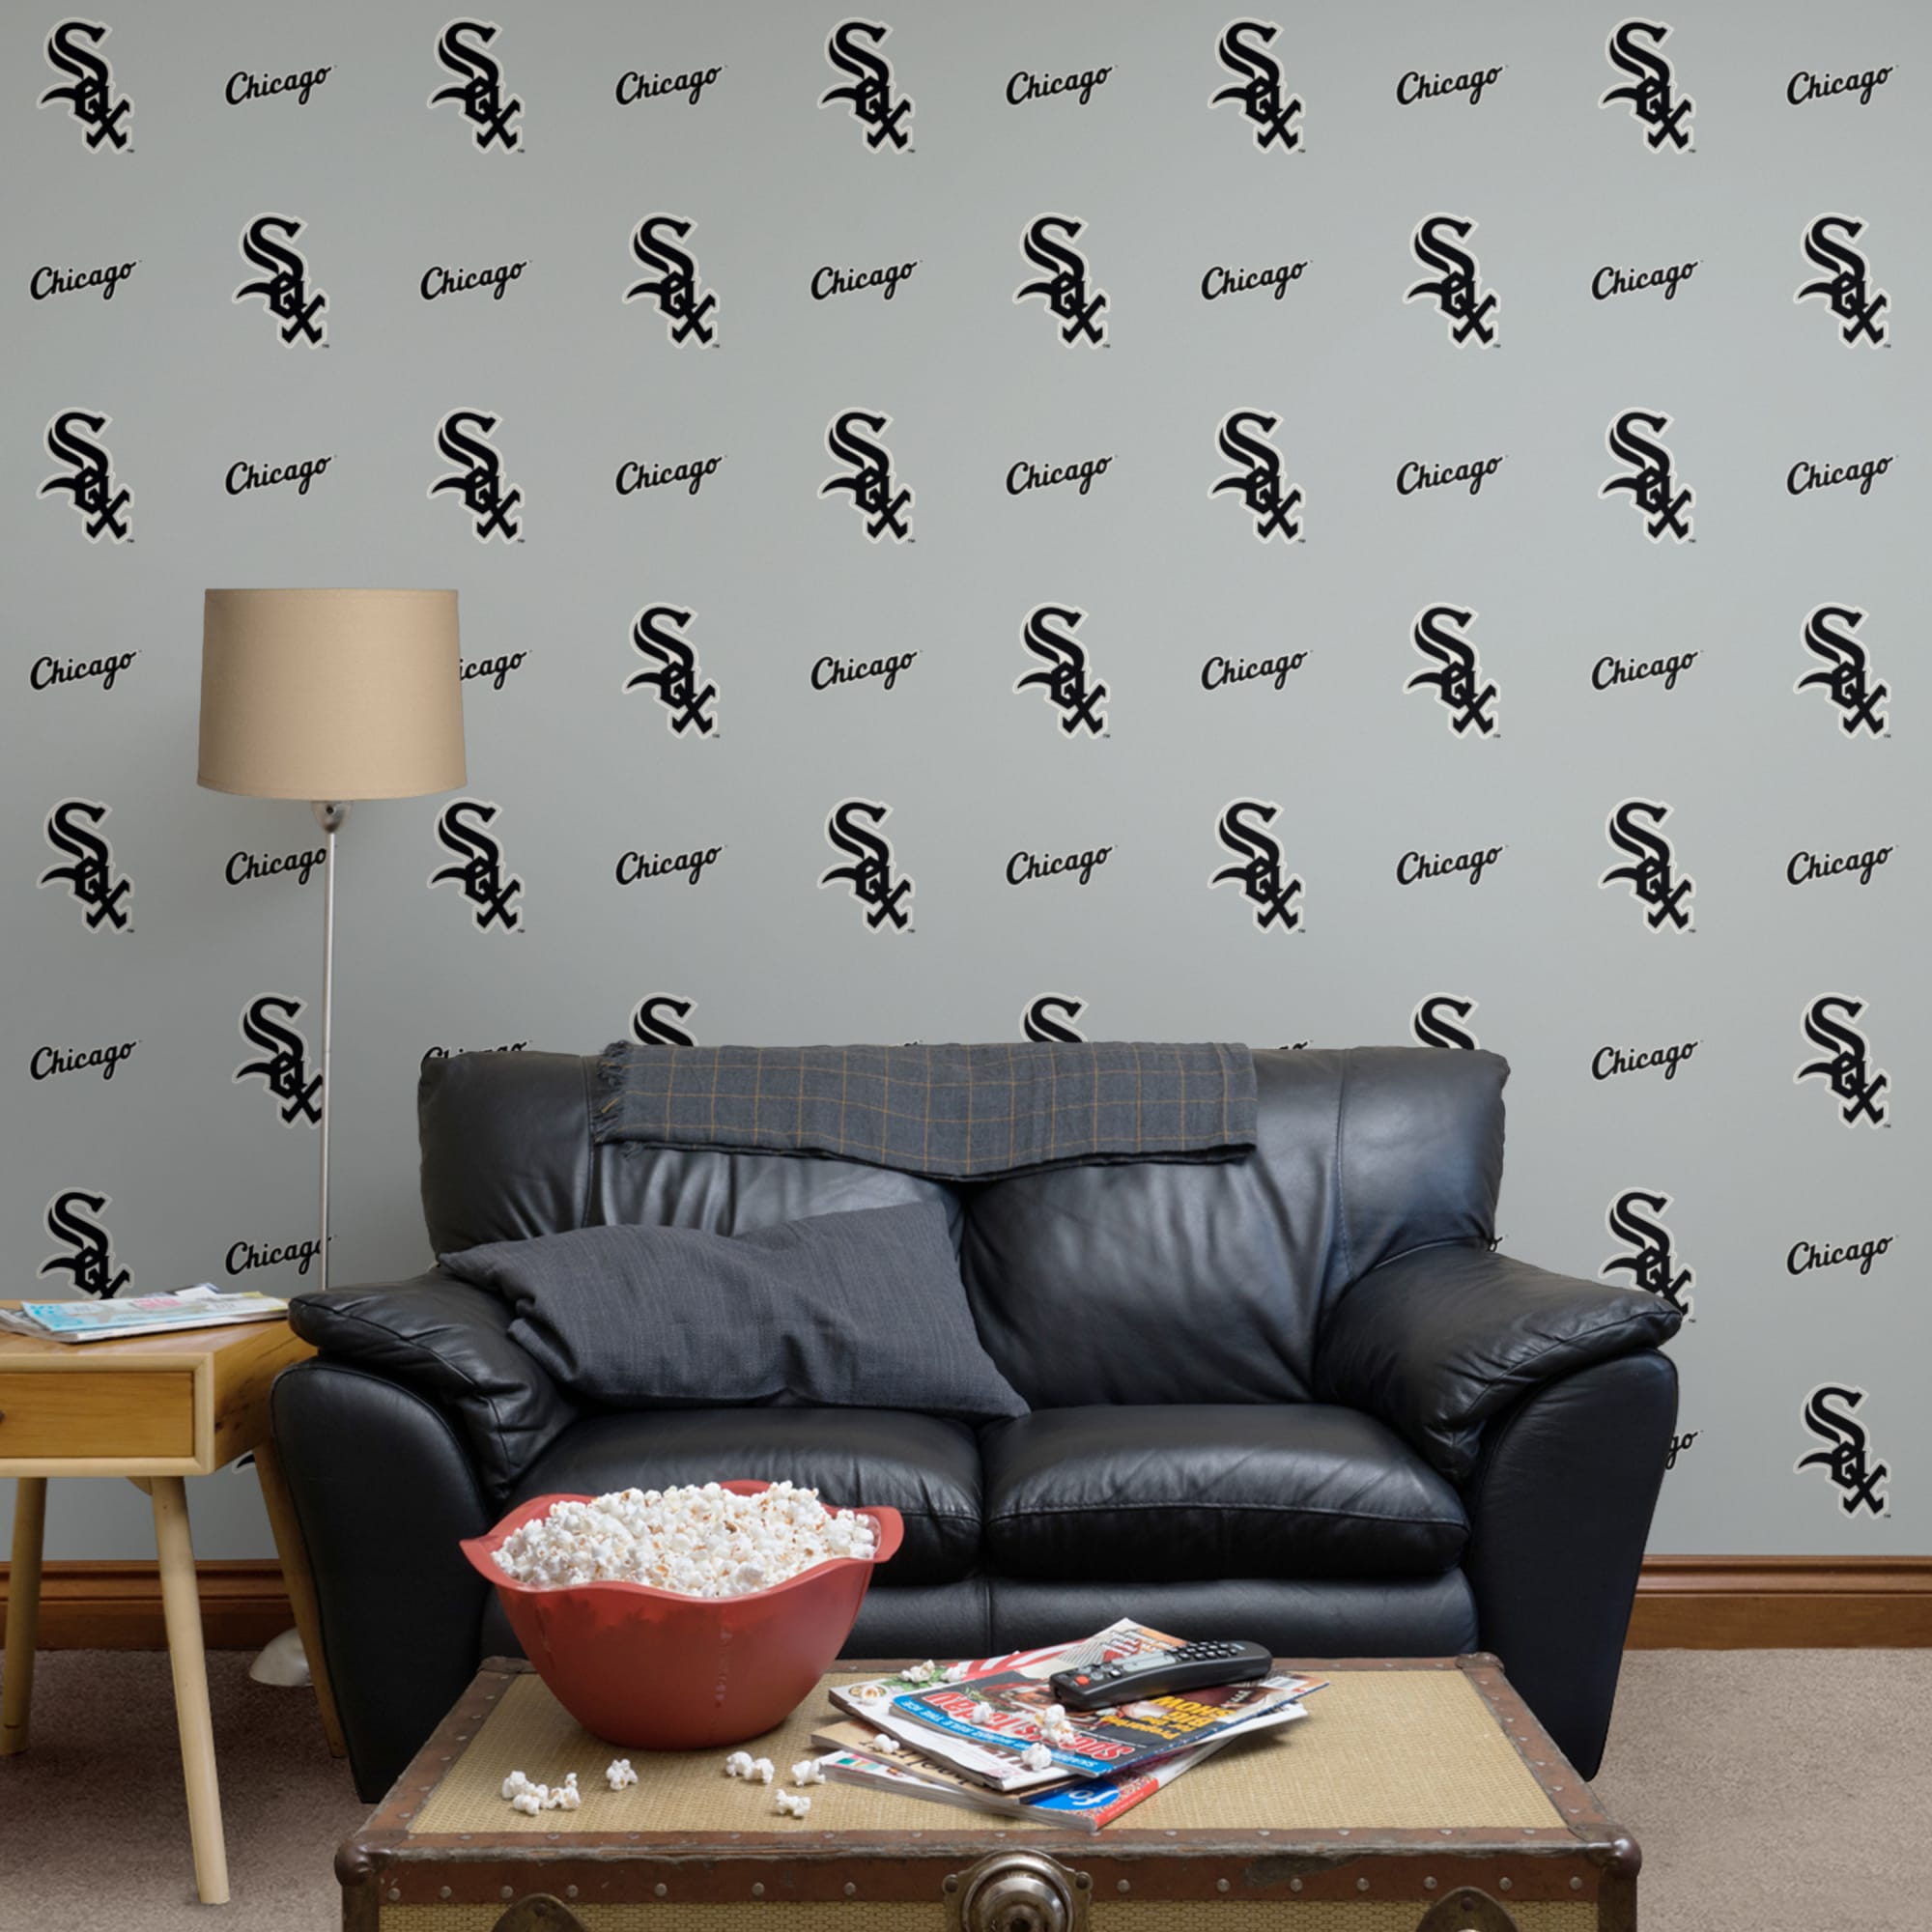 Chicago White Sox: Logo Pattern - Officially Licensed Removable Wallpaper 12" x 12" Sample by Fathead